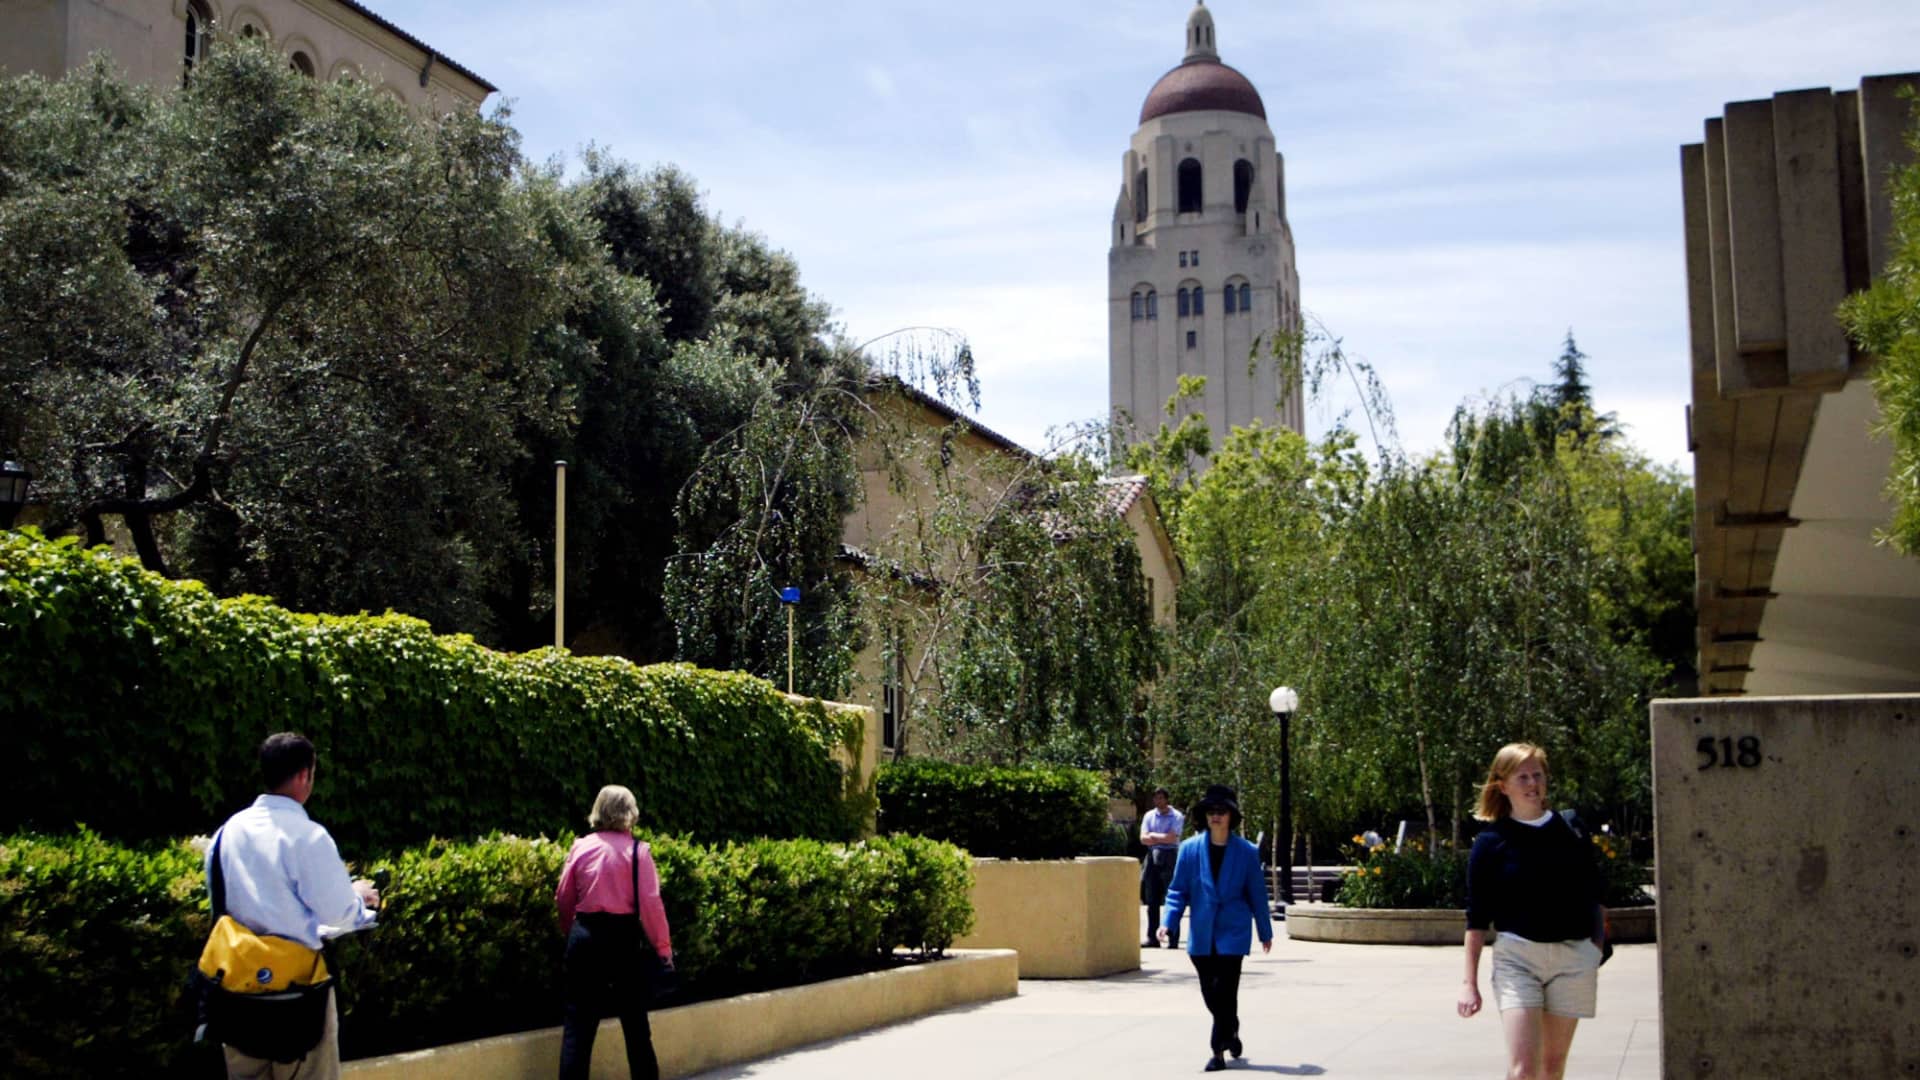 Students walk past Stanford University's Graduate School of Business in Stanford, California.